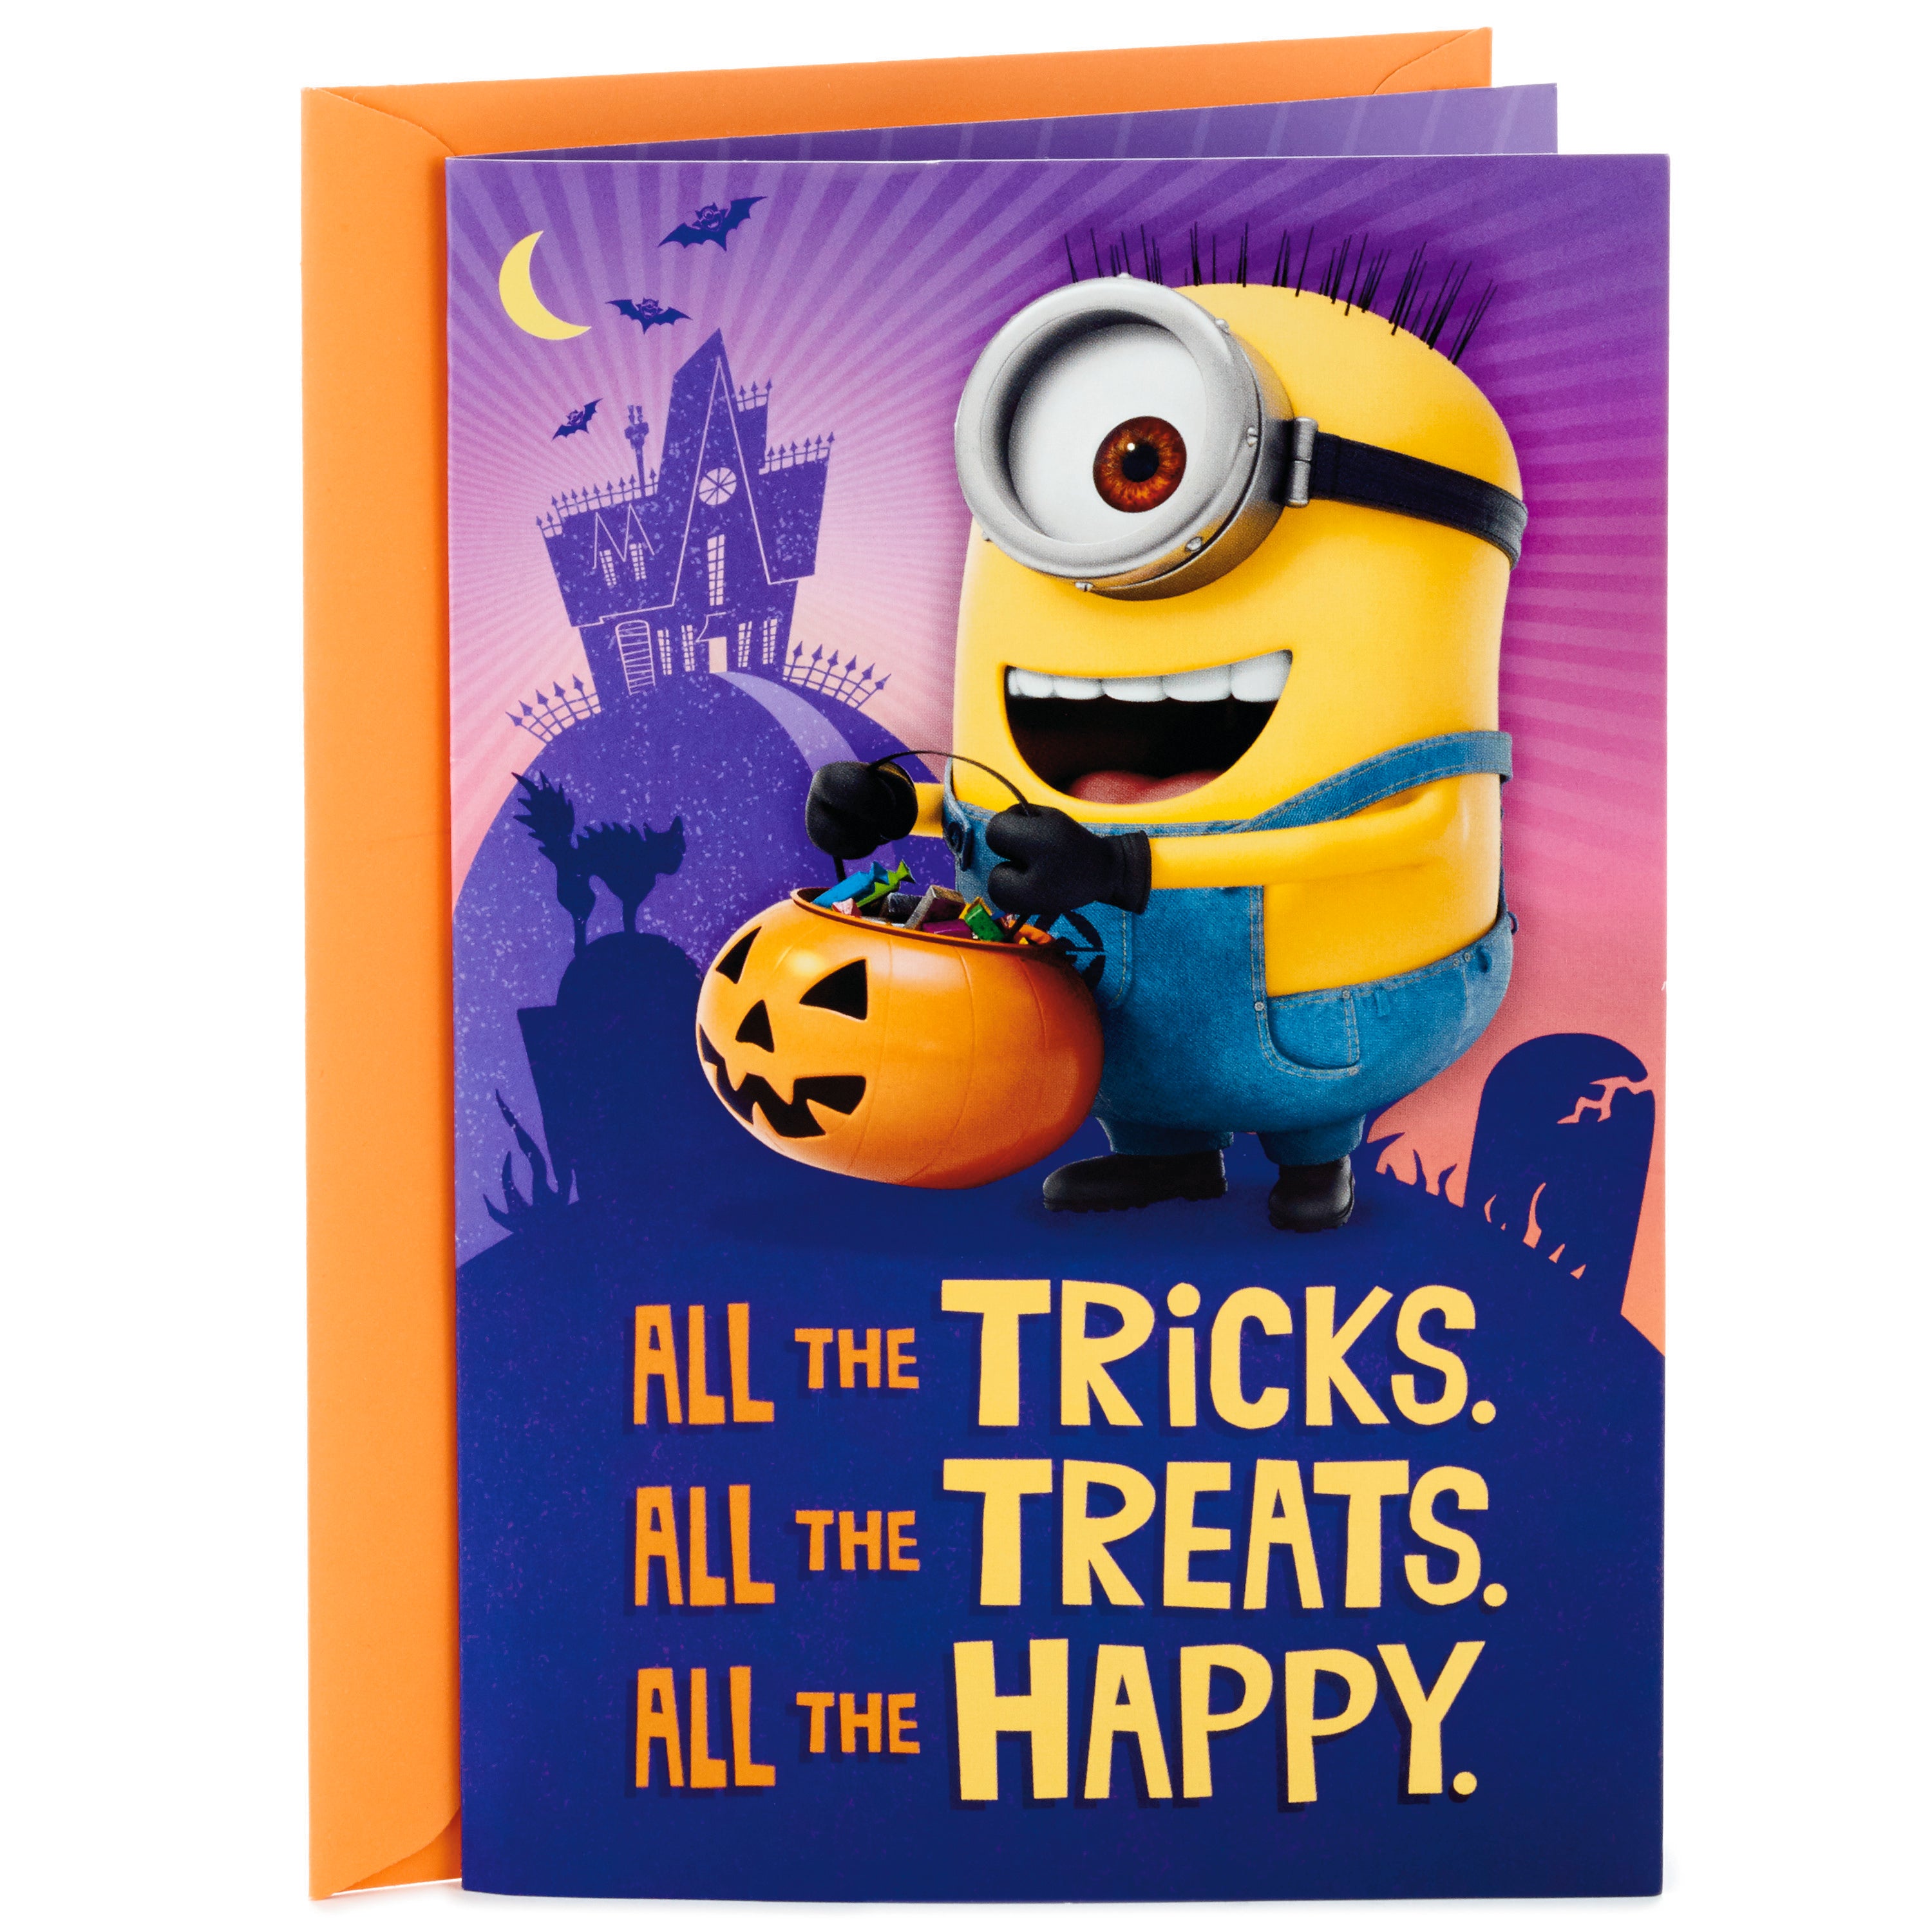 Minions Halloween Card with Song for Kids (Plays